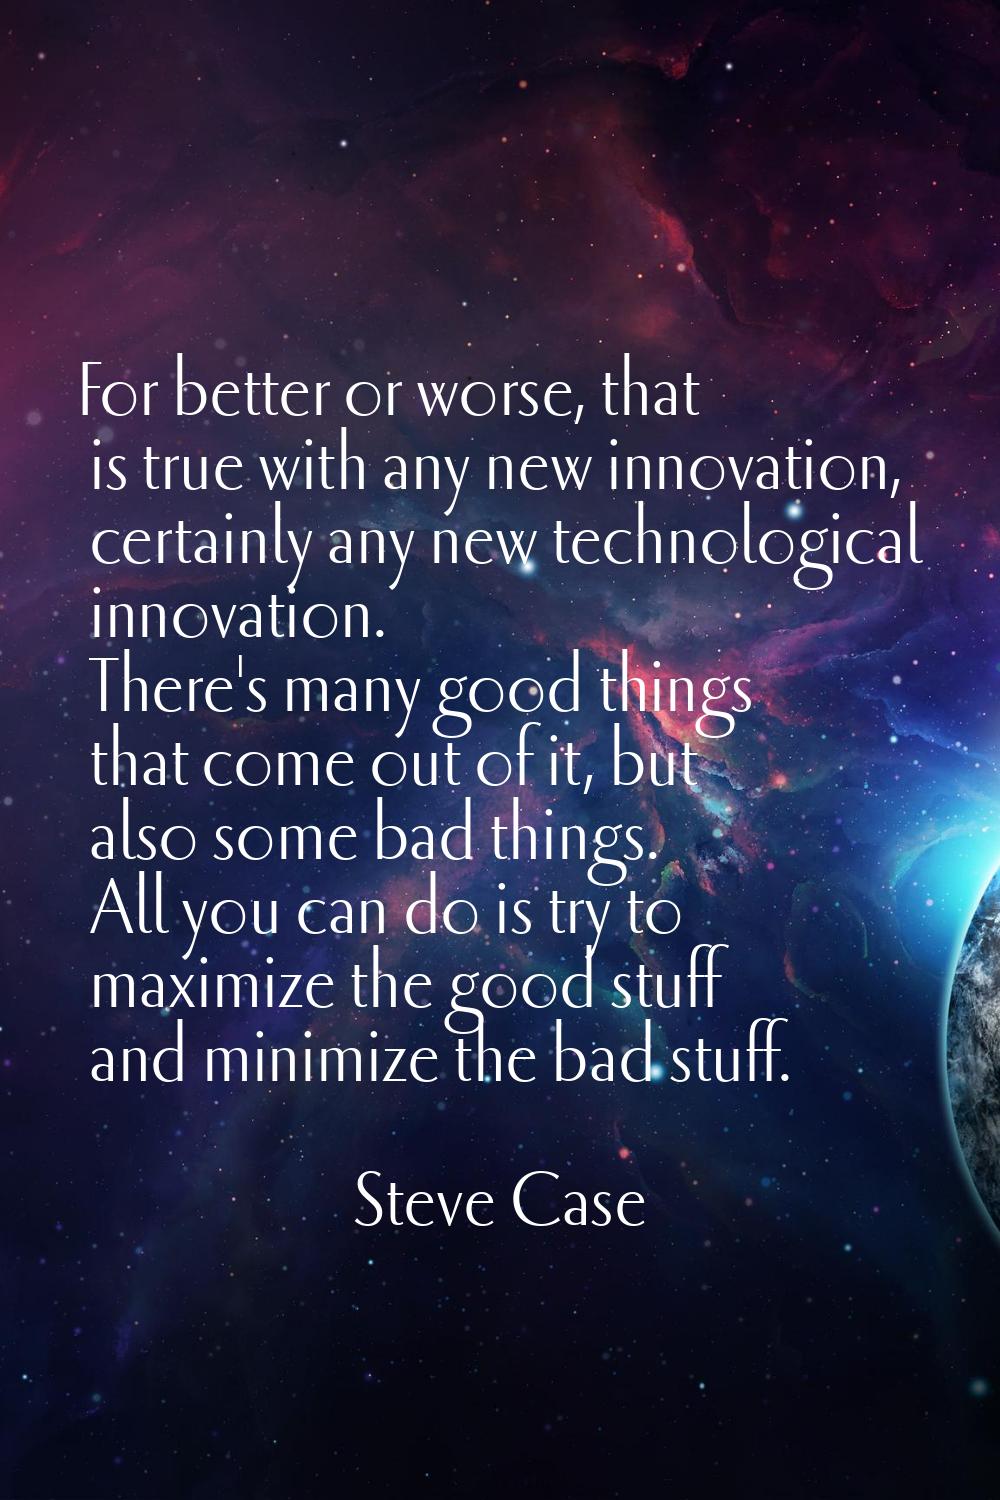 For better or worse, that is true with any new innovation, certainly any new technological innovati